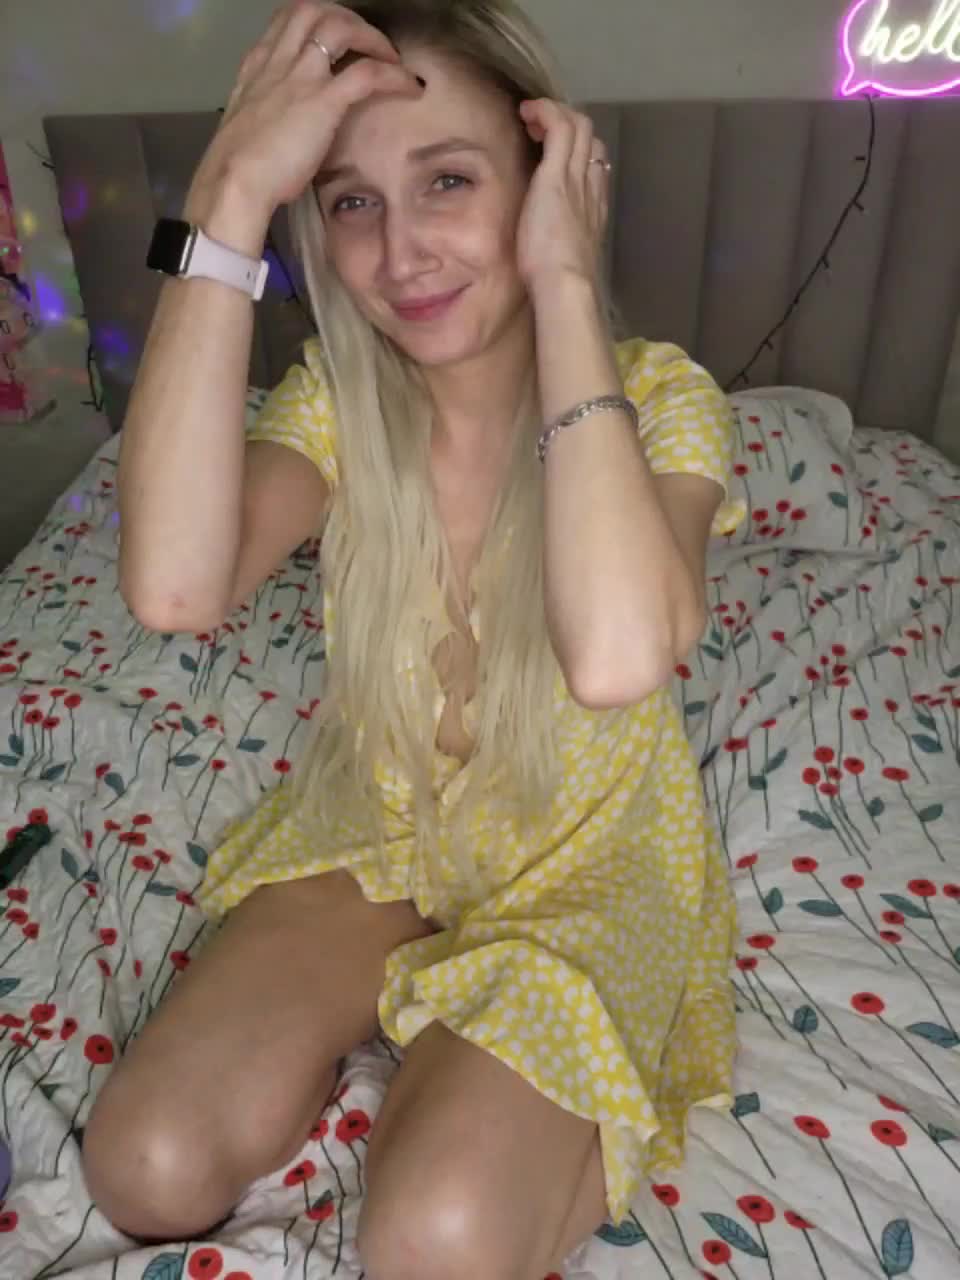 View or download file dvenasti on 2023-02-25 from bongacams